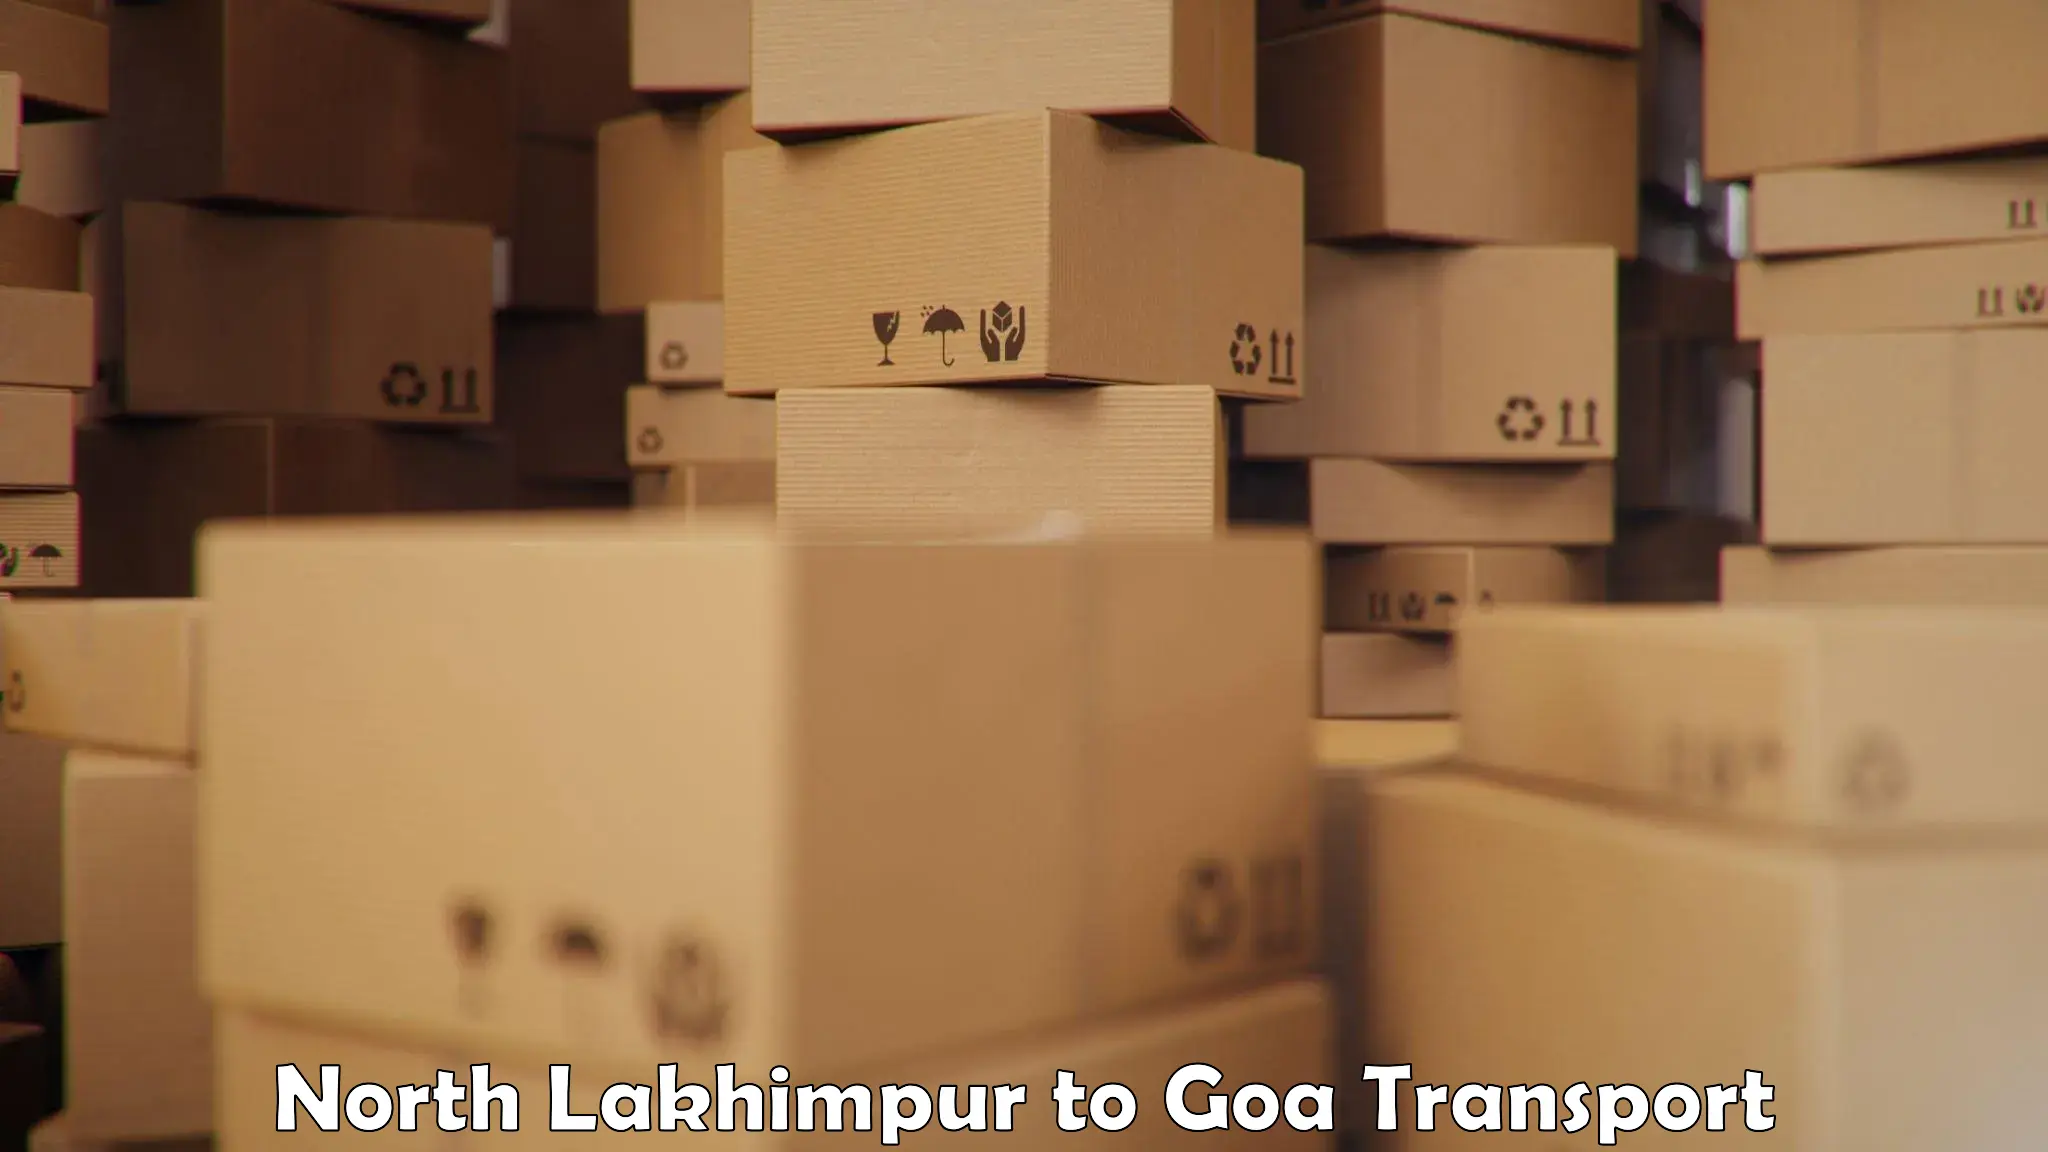 Daily parcel service transport in North Lakhimpur to Goa University